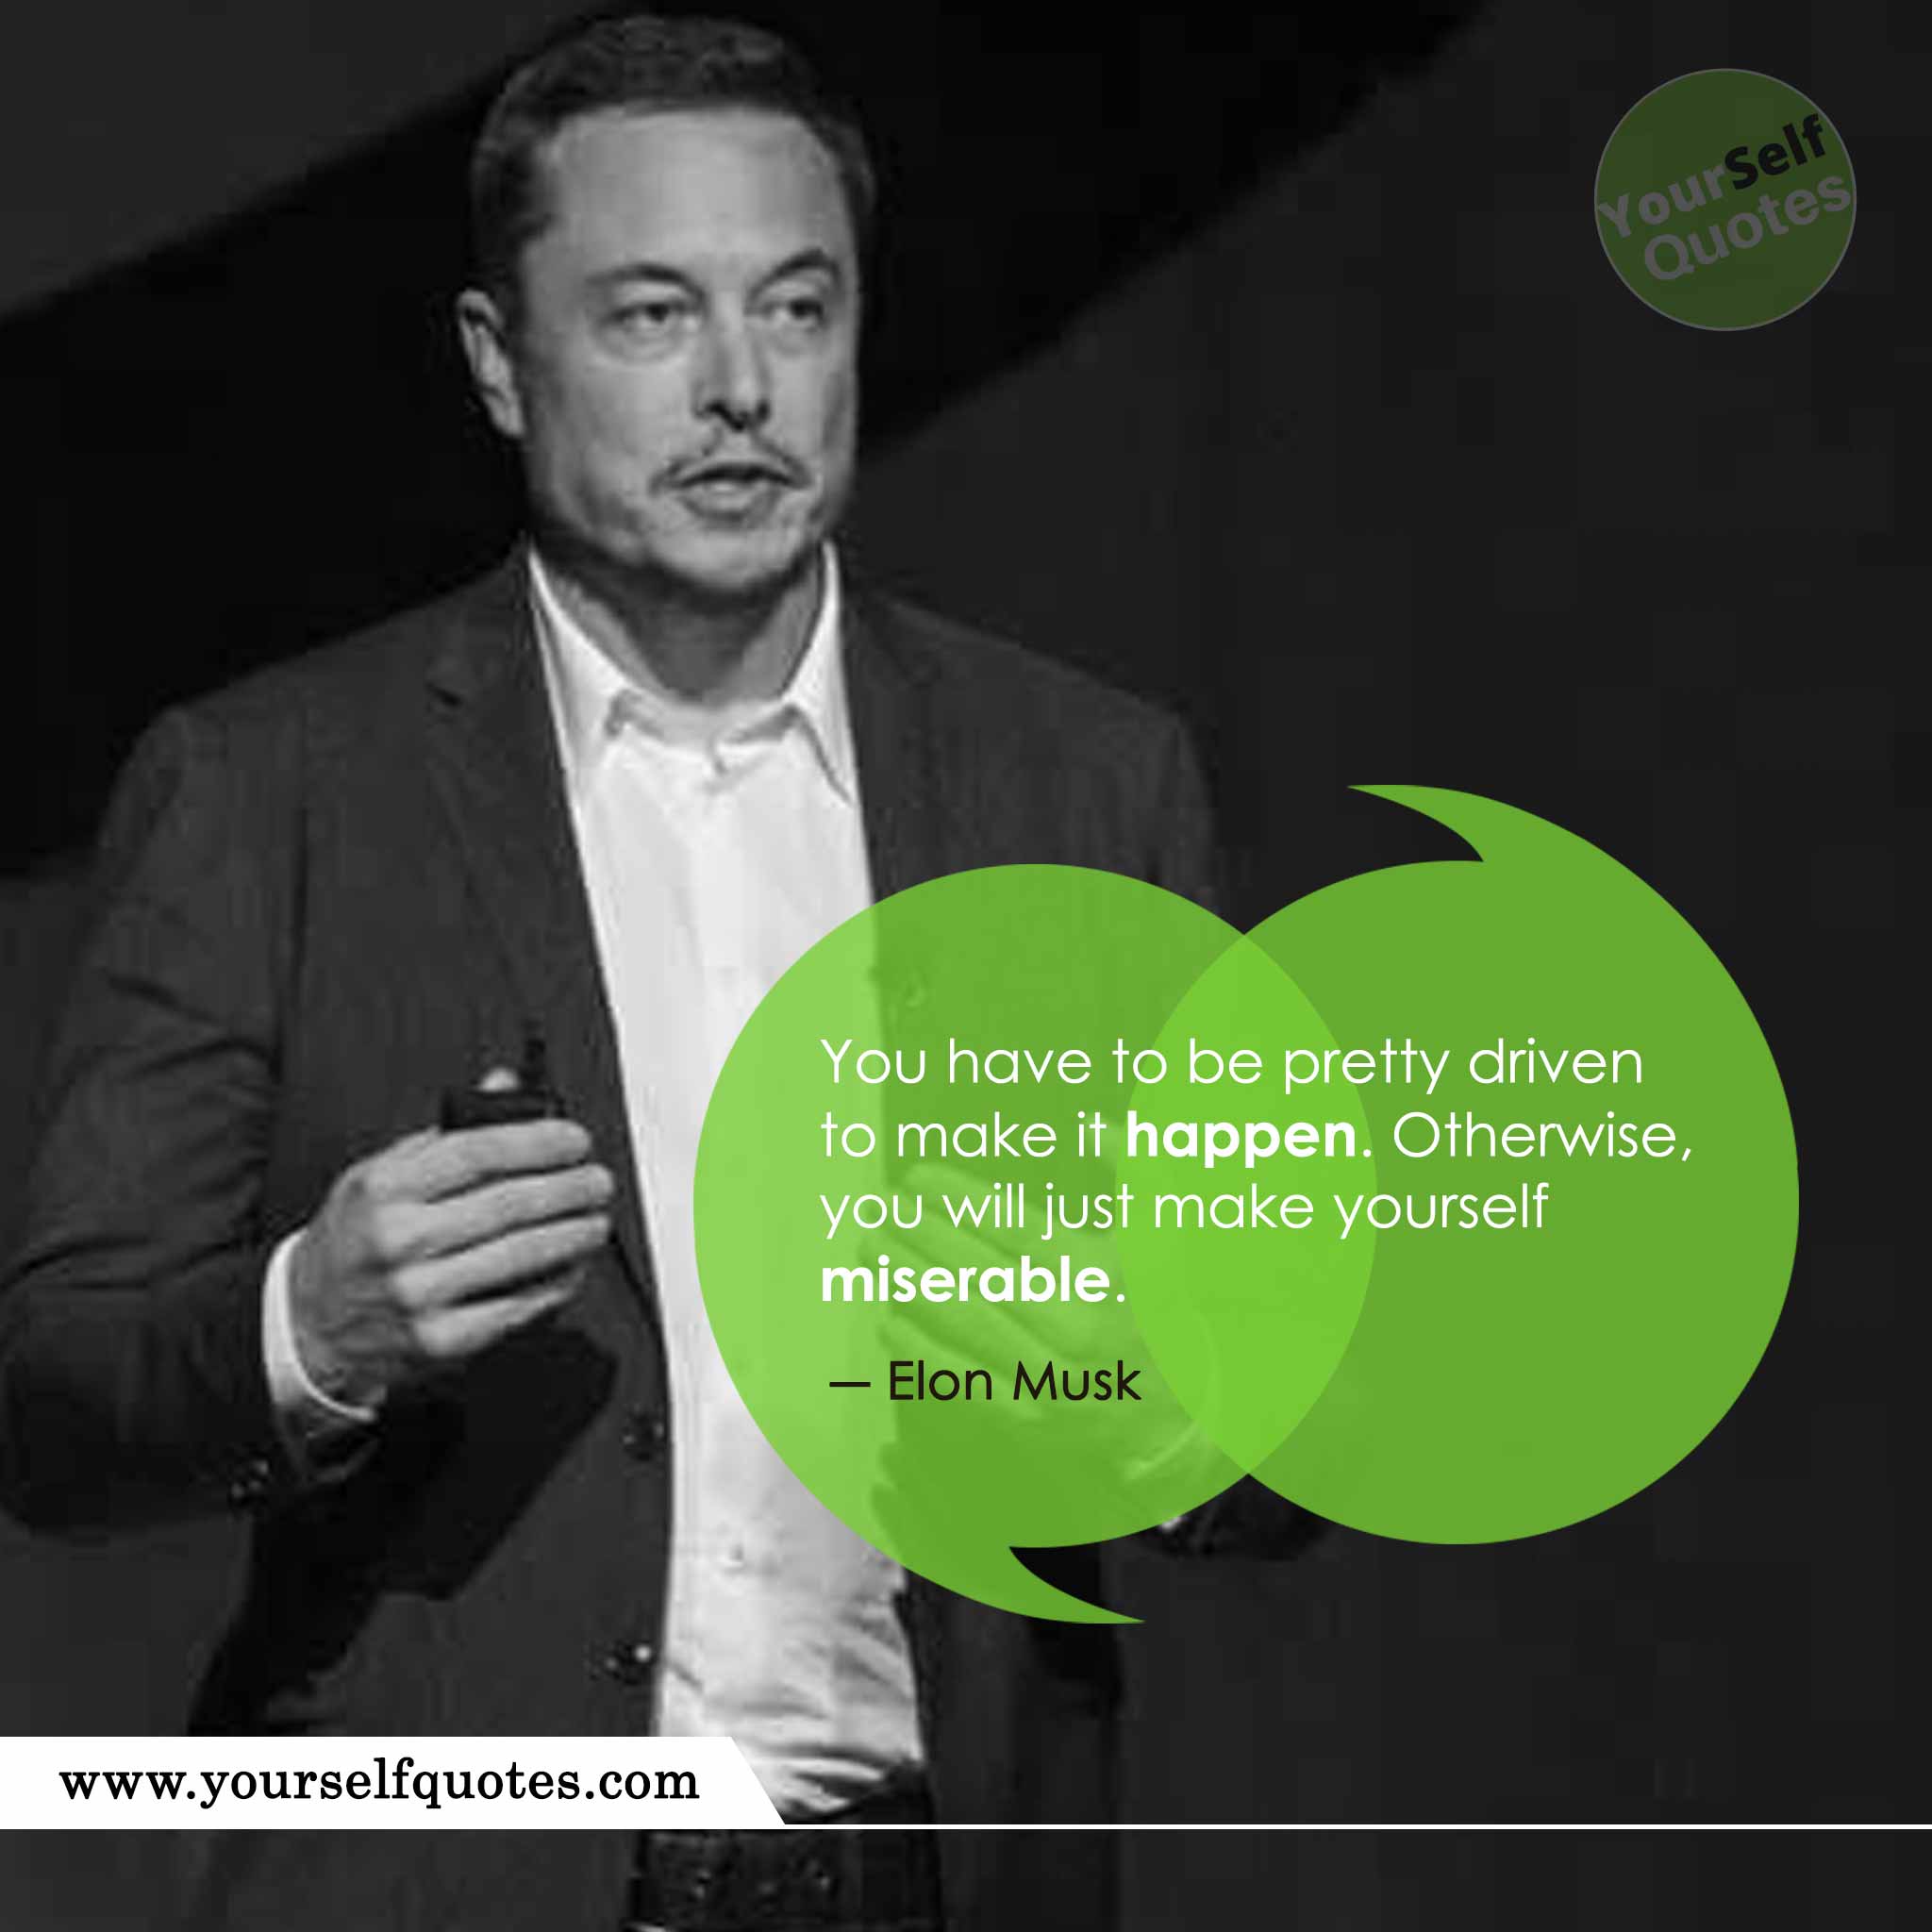 Quotes From Elon Musk 